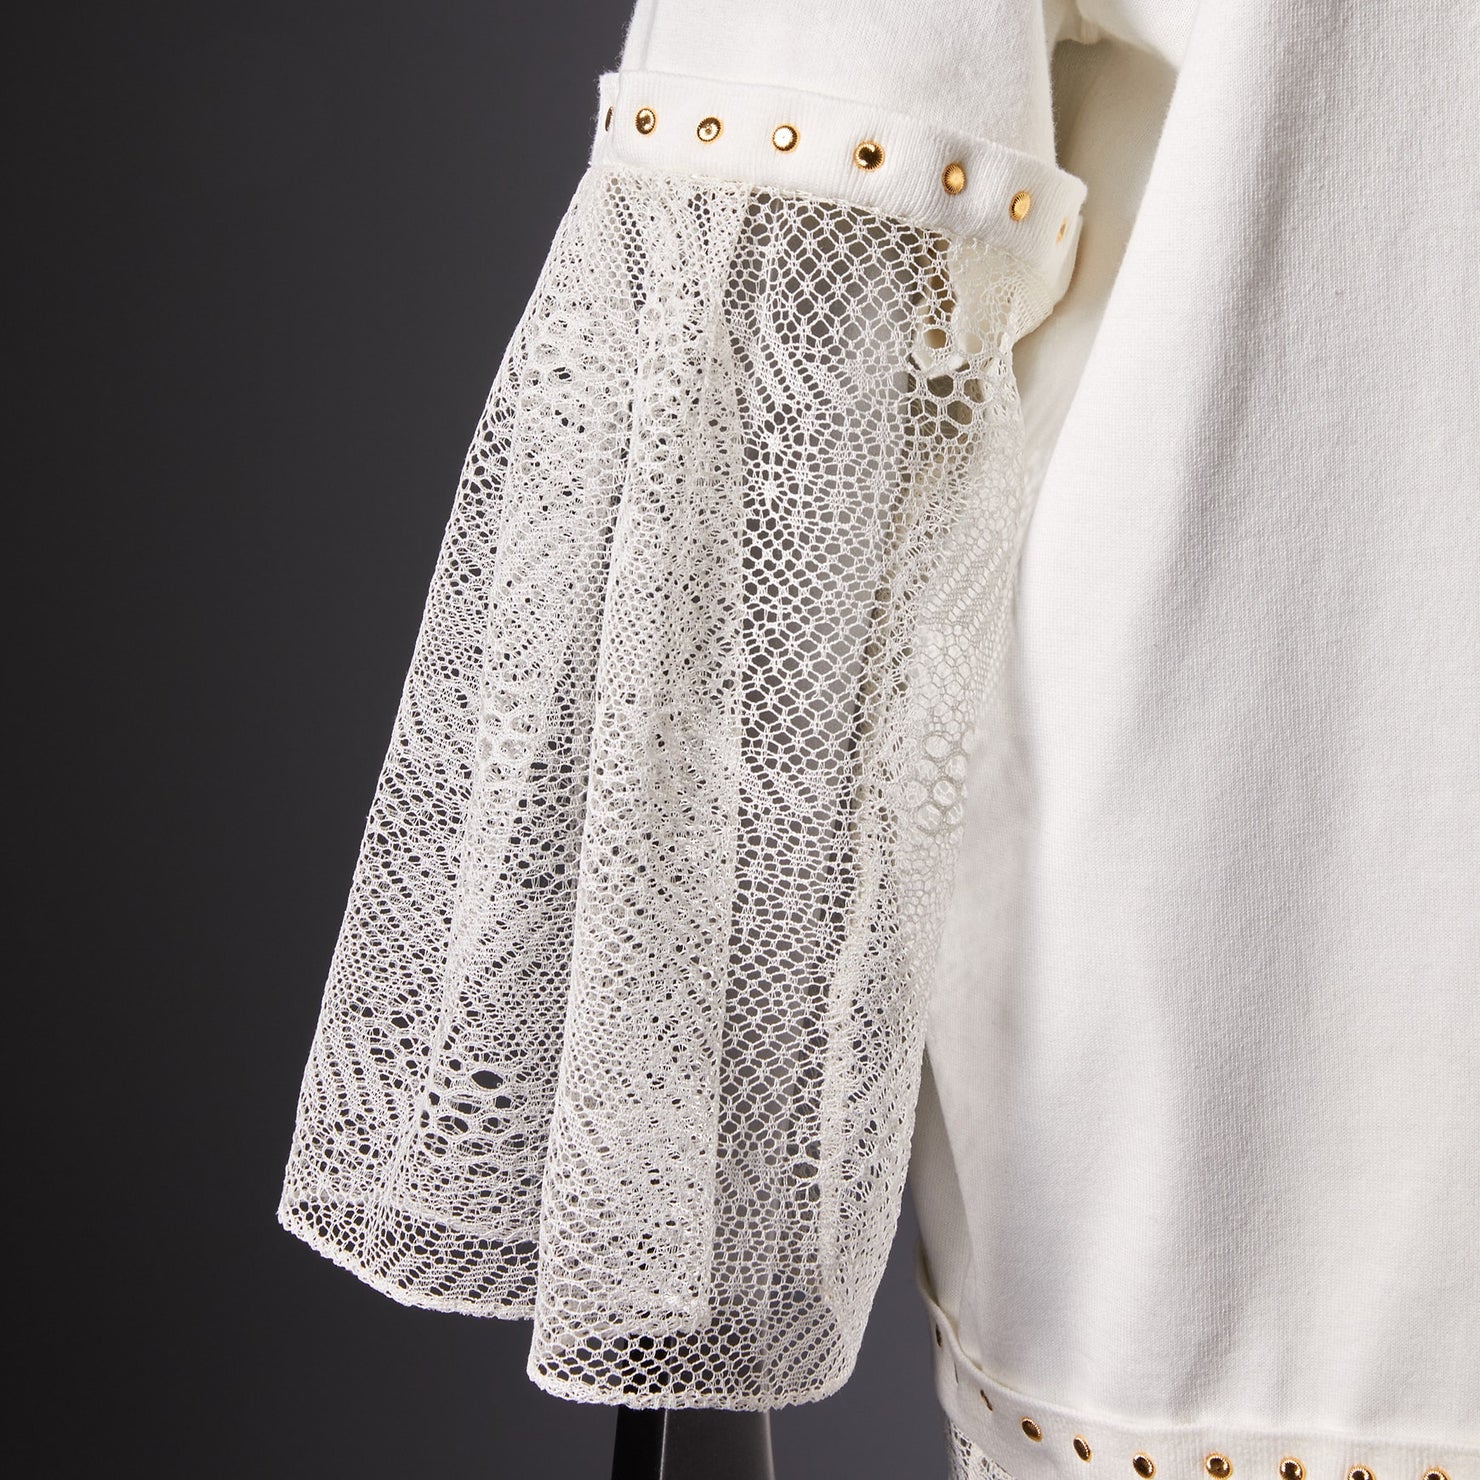 TYPE-1 Knit Half Sleeves French Lace Sleeve Parts Long (White Cells)